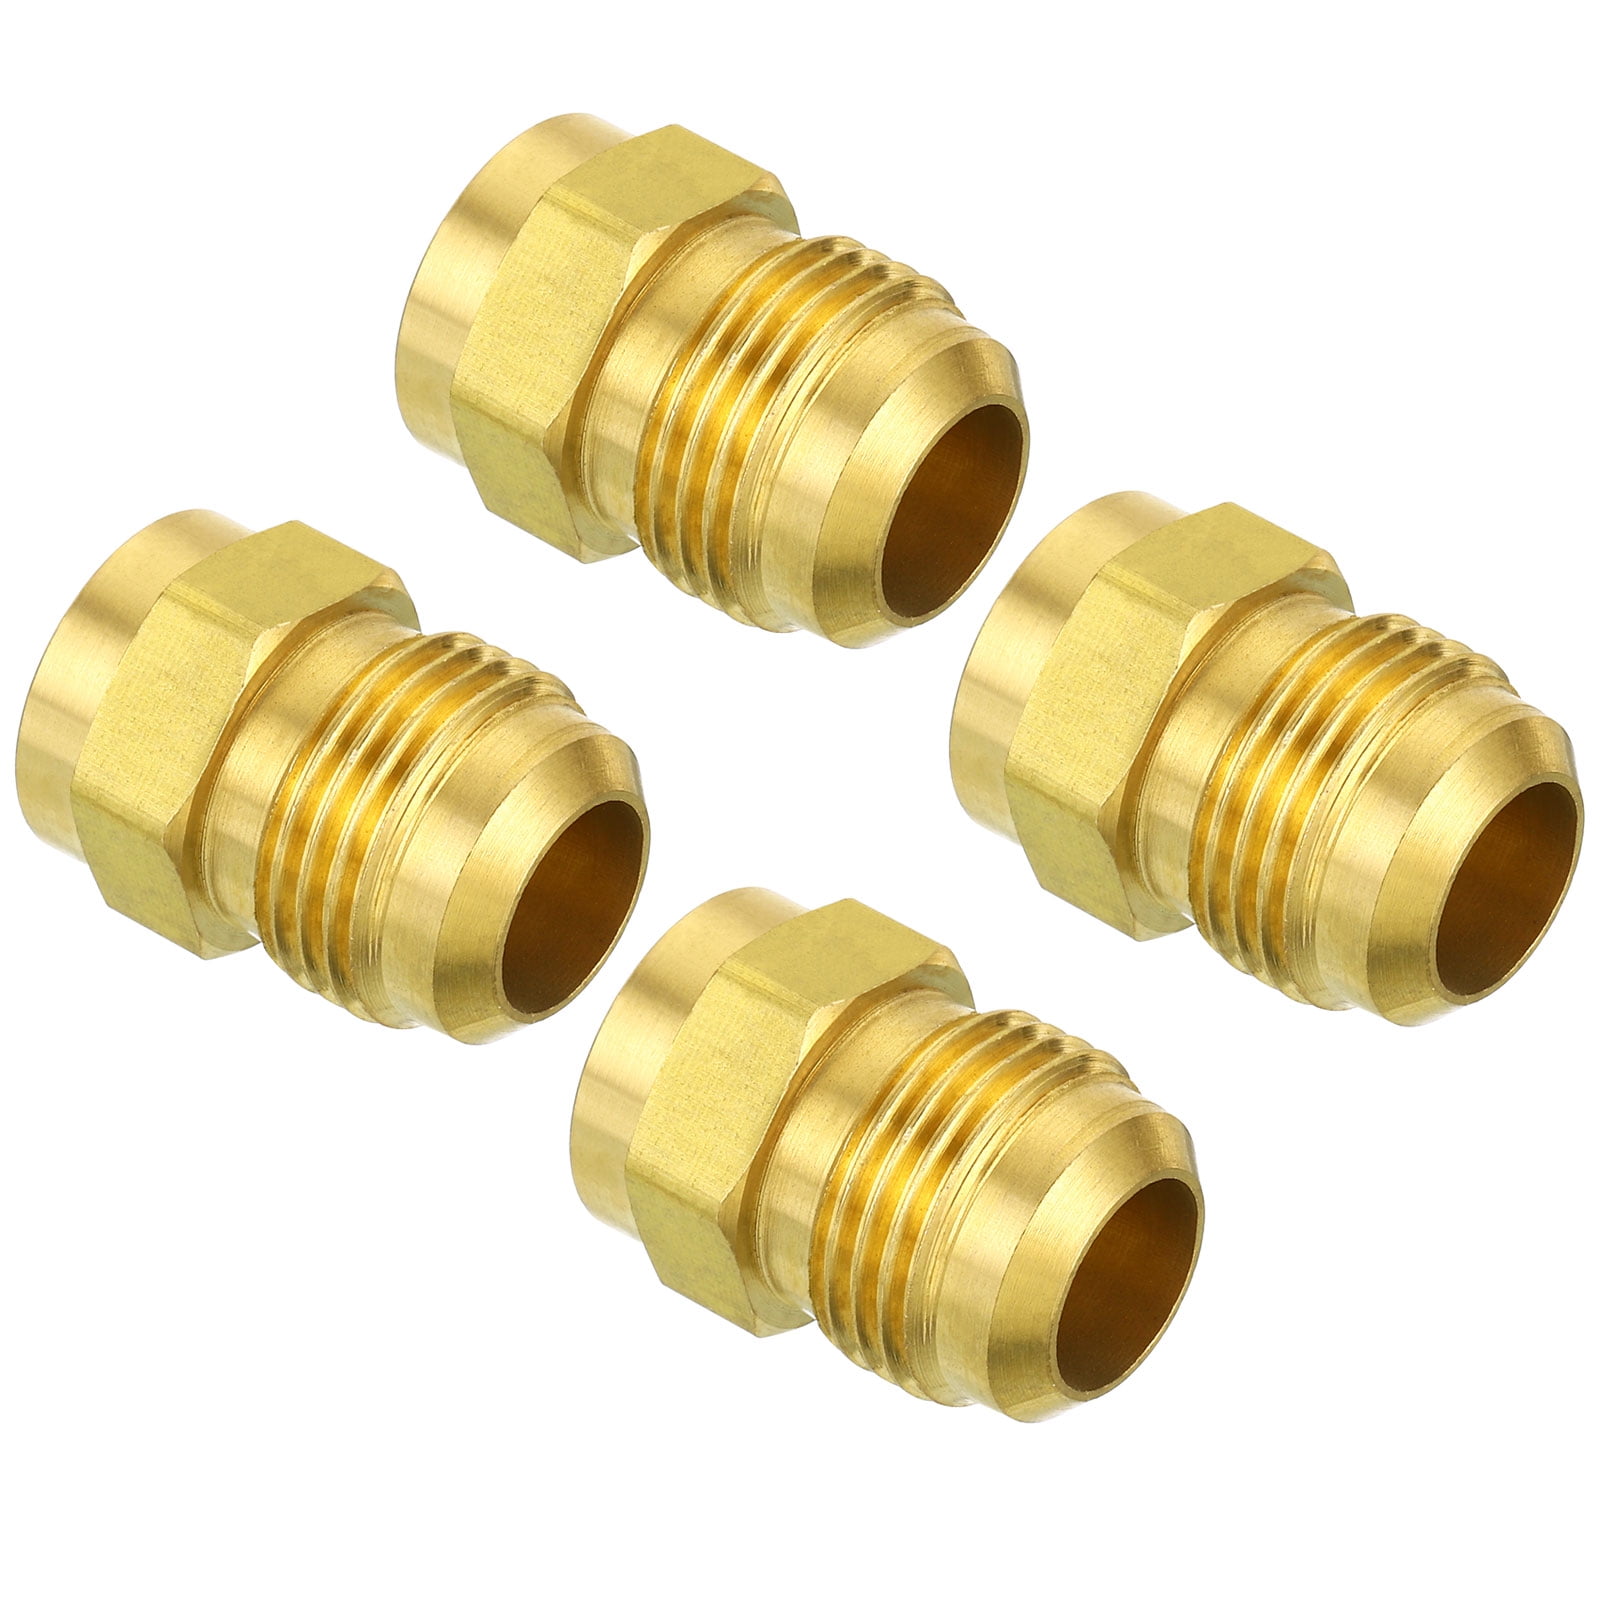 Uxcell 1/4 SAE Male Thread Brass Flare Tube Fitting Pipe Adapter